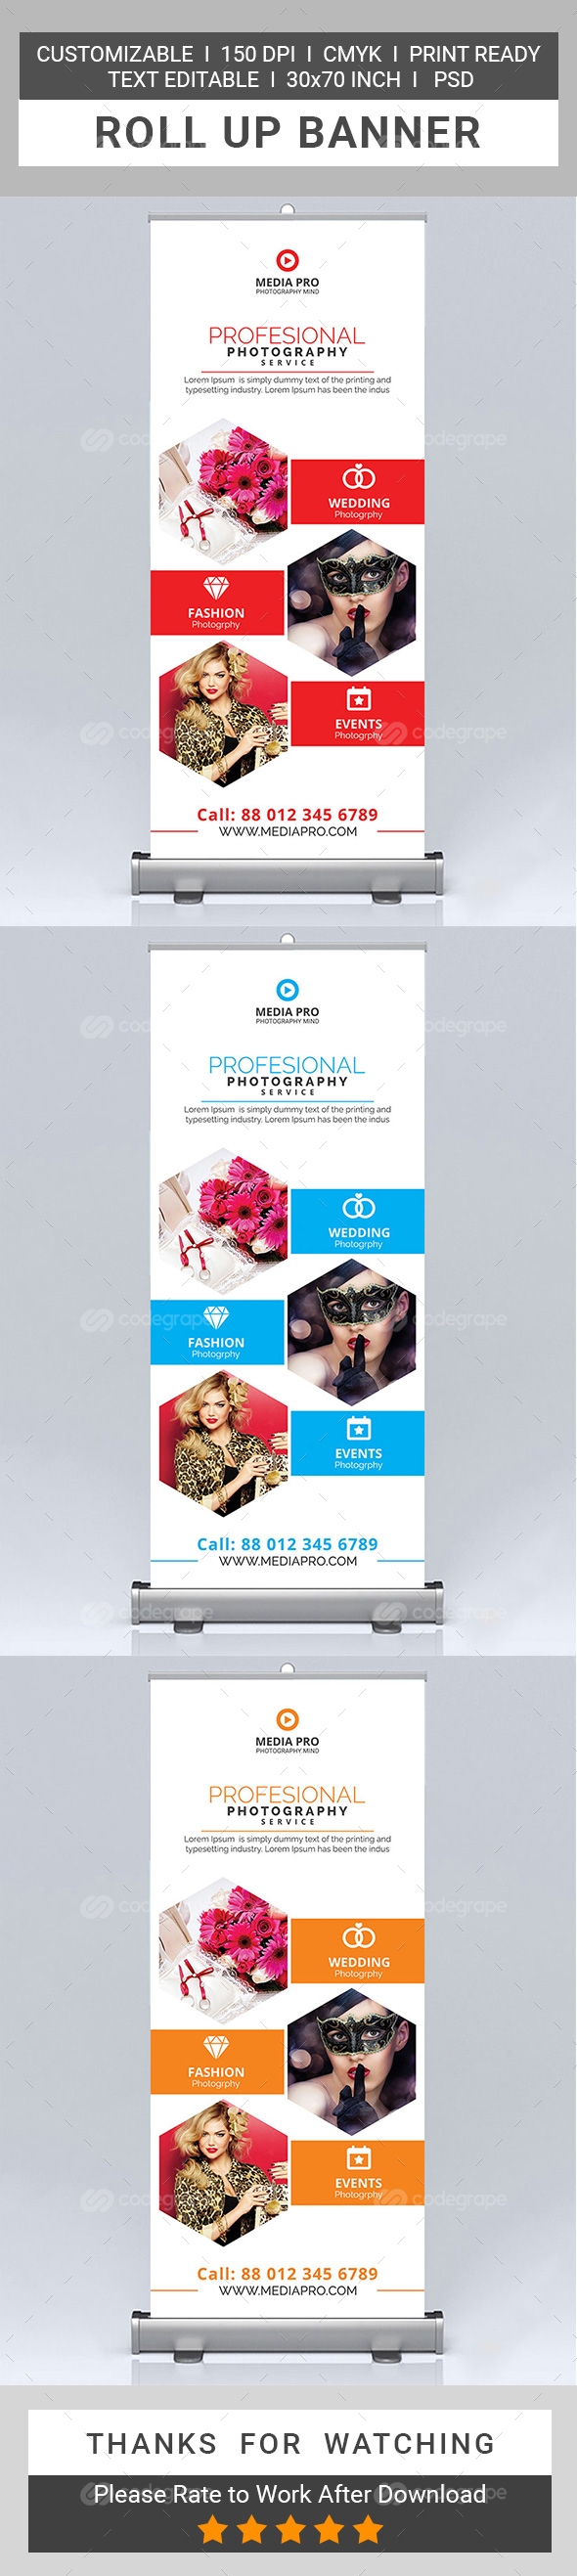 Photography Roll Up Banner